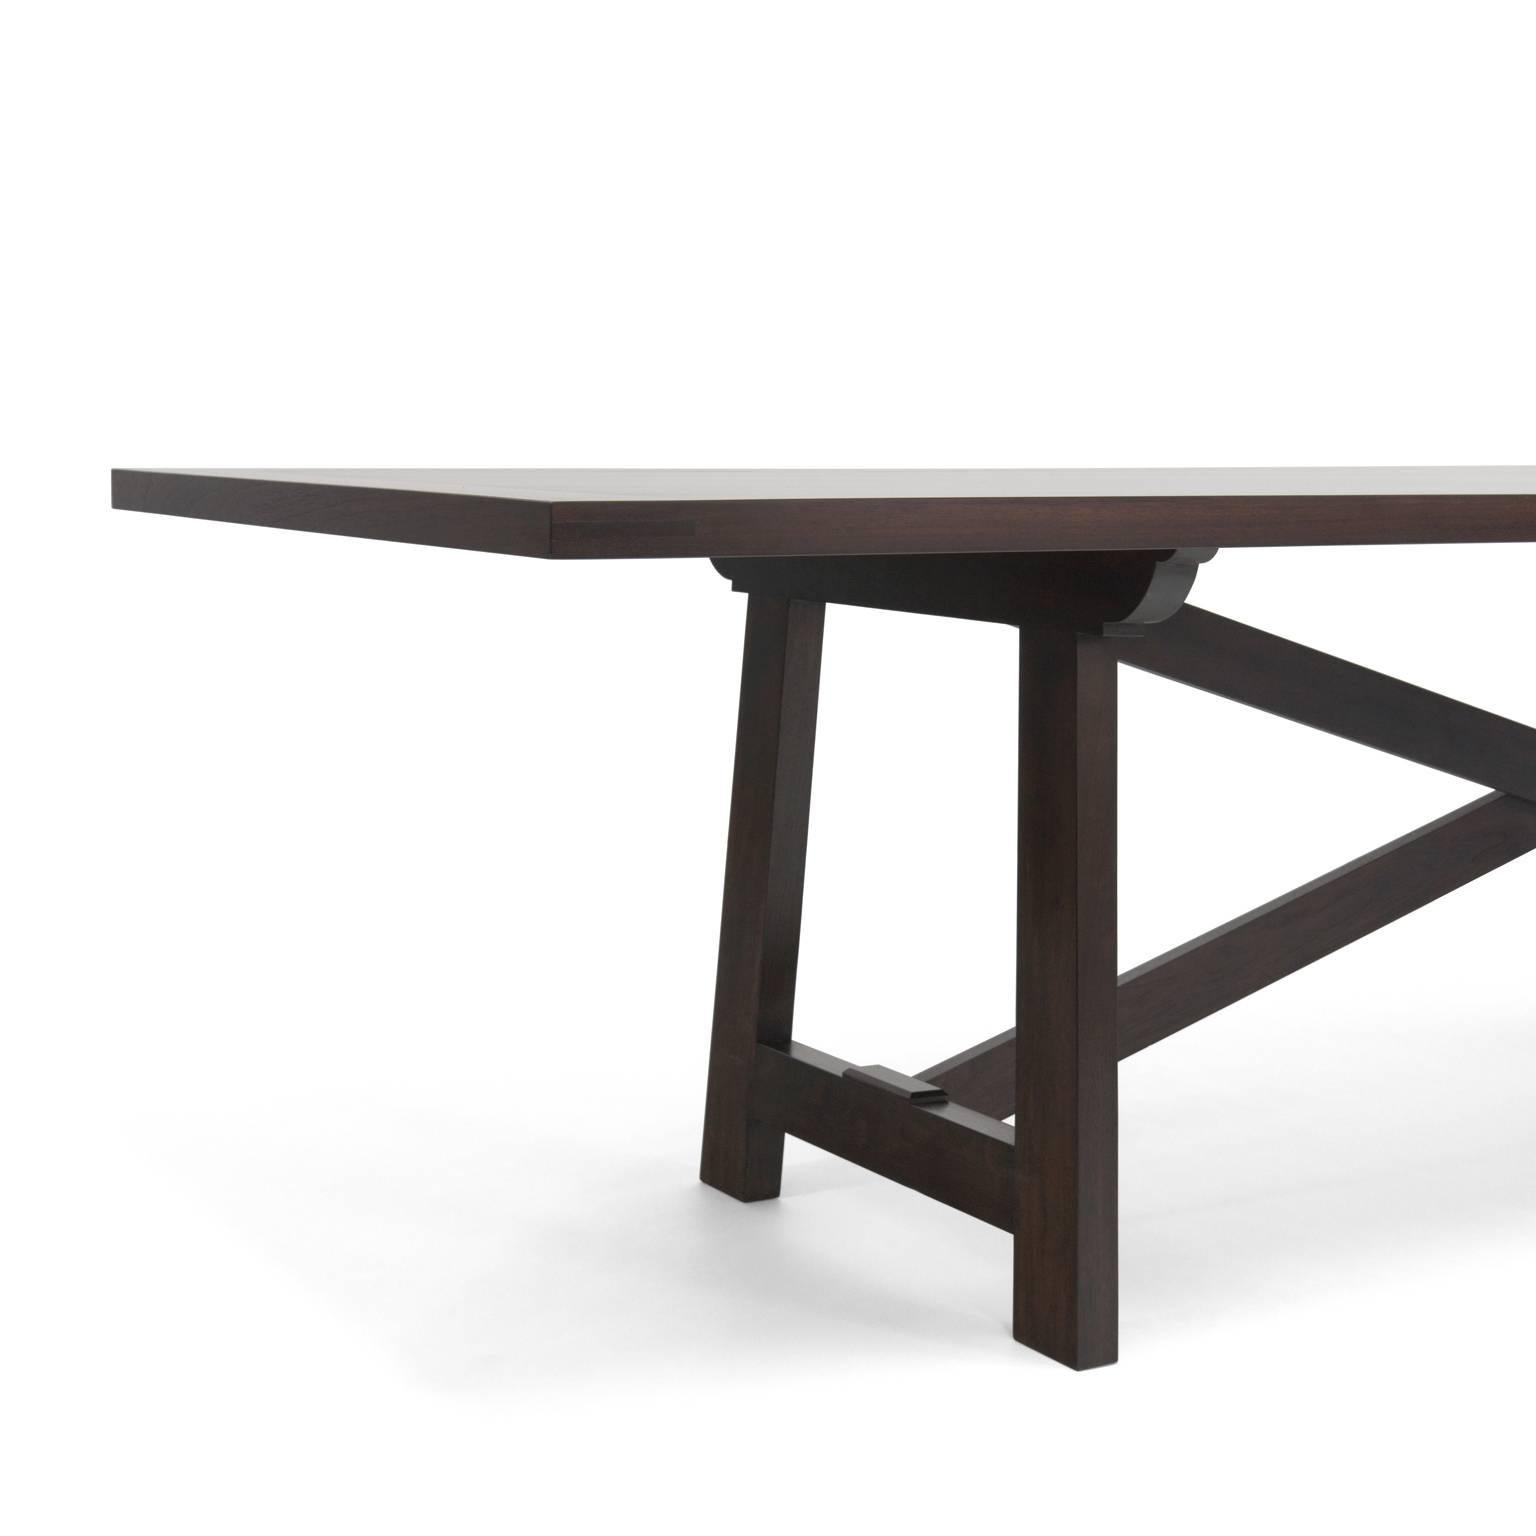 Atelier Demiurge Collection Siena Dining Table shown in walnut with mink finish, including two 18" extension leaves. Inquire for finish and extension options.

Atelier Demiurge Collection pieces are made to order, and custom sizes are